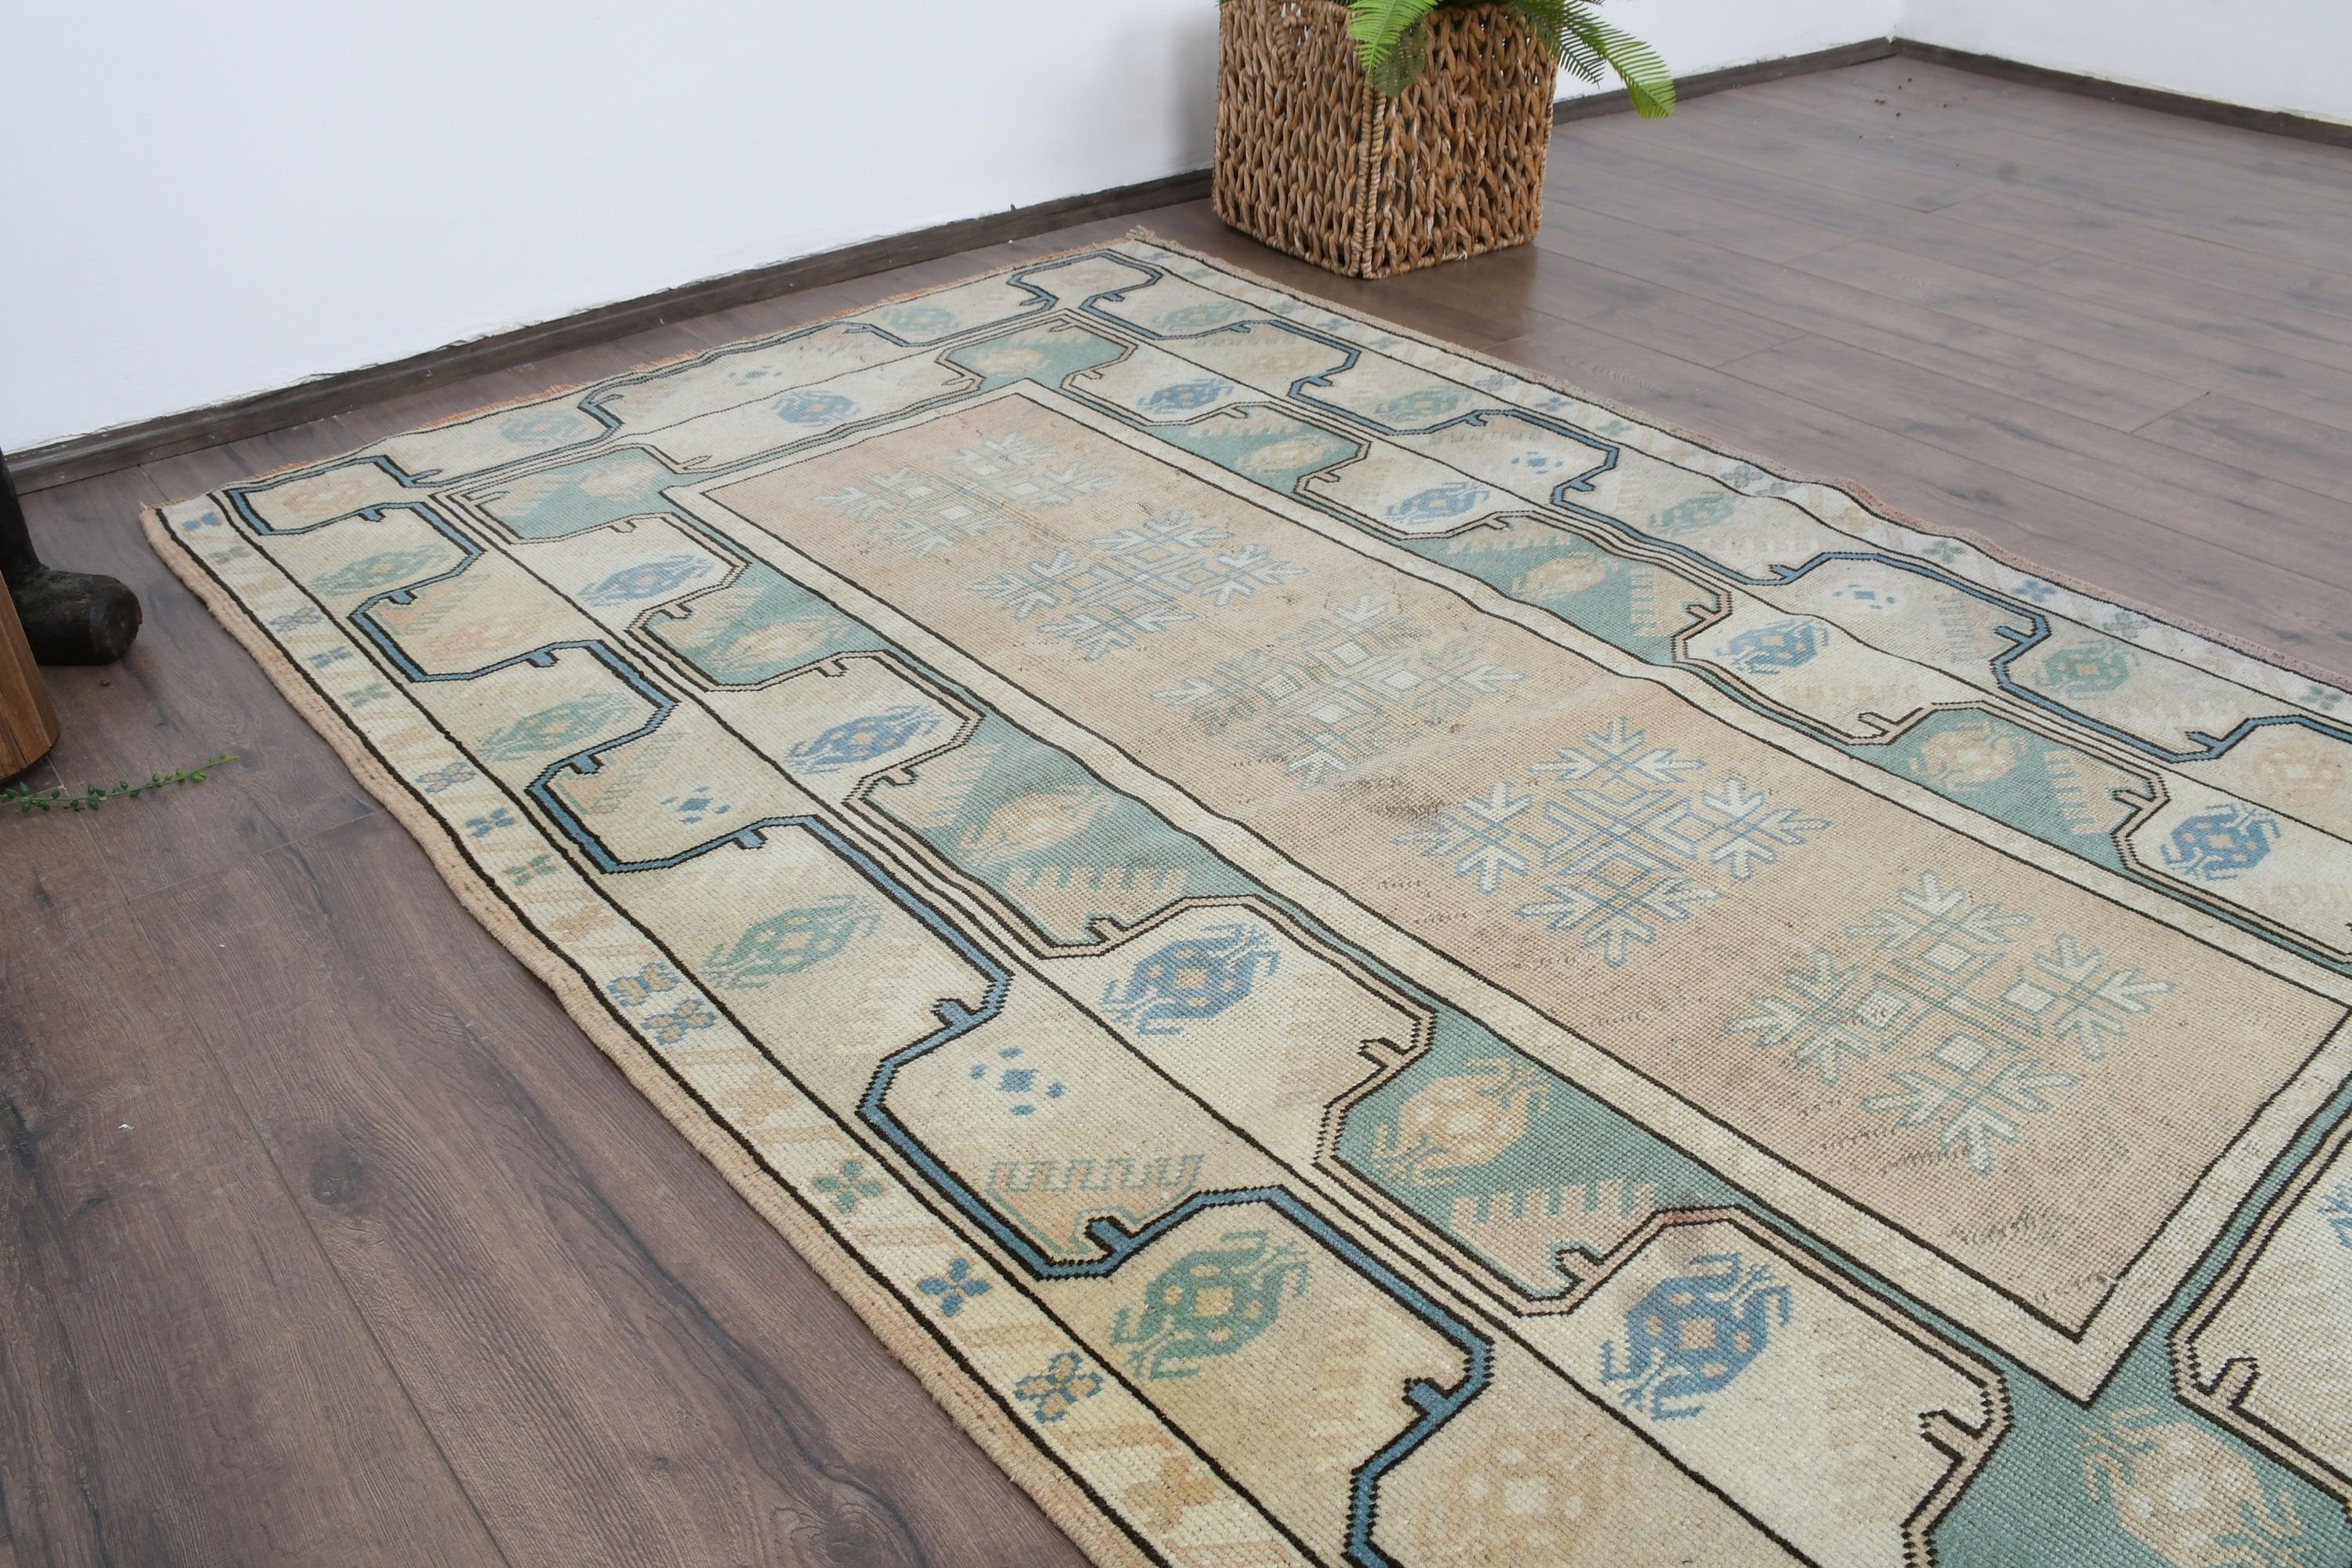 Vintage Rug, Entry Rug, Antique Rugs, 3.8x6.1 ft Accent Rug, Cool Rug, Nursery Rugs, Turkish Rug, Rugs for Kitchen, Beige Antique Rugs